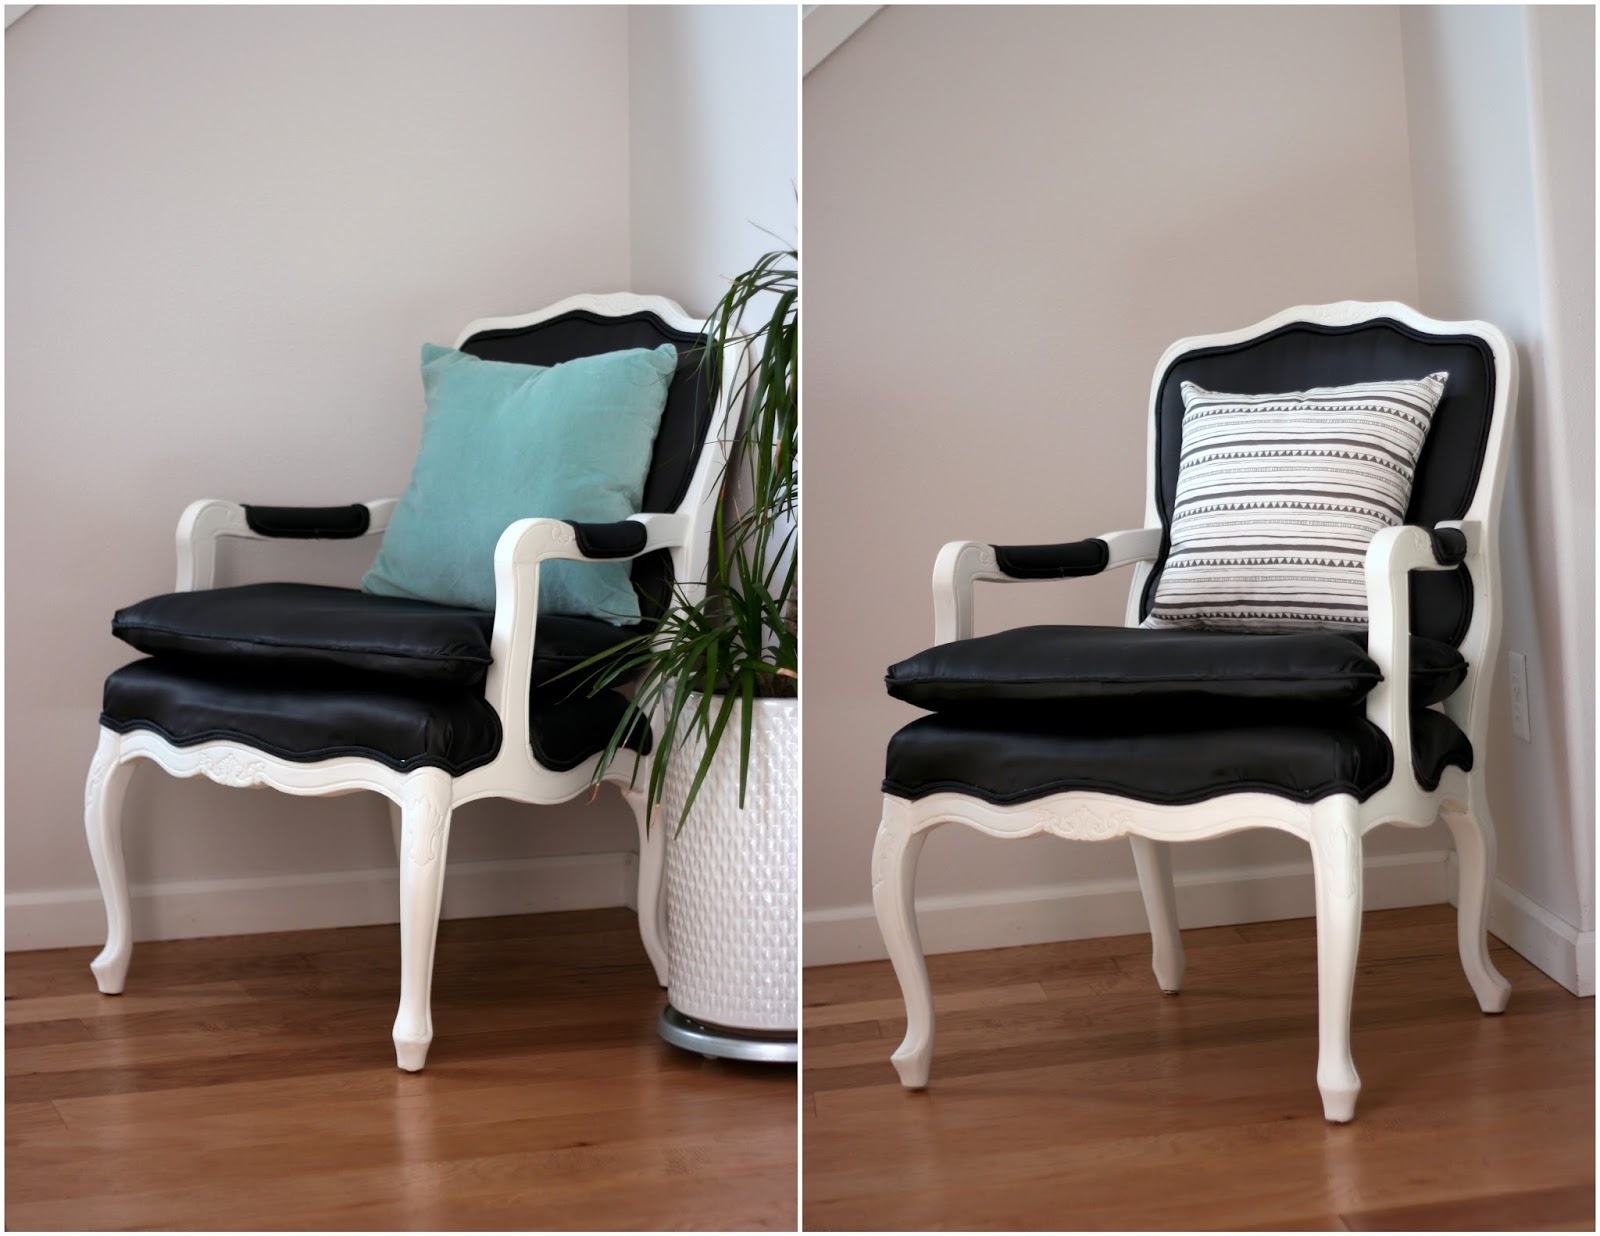 The finished product: my refurbished Louis Chair! (Part 3) / Create / Enjoy